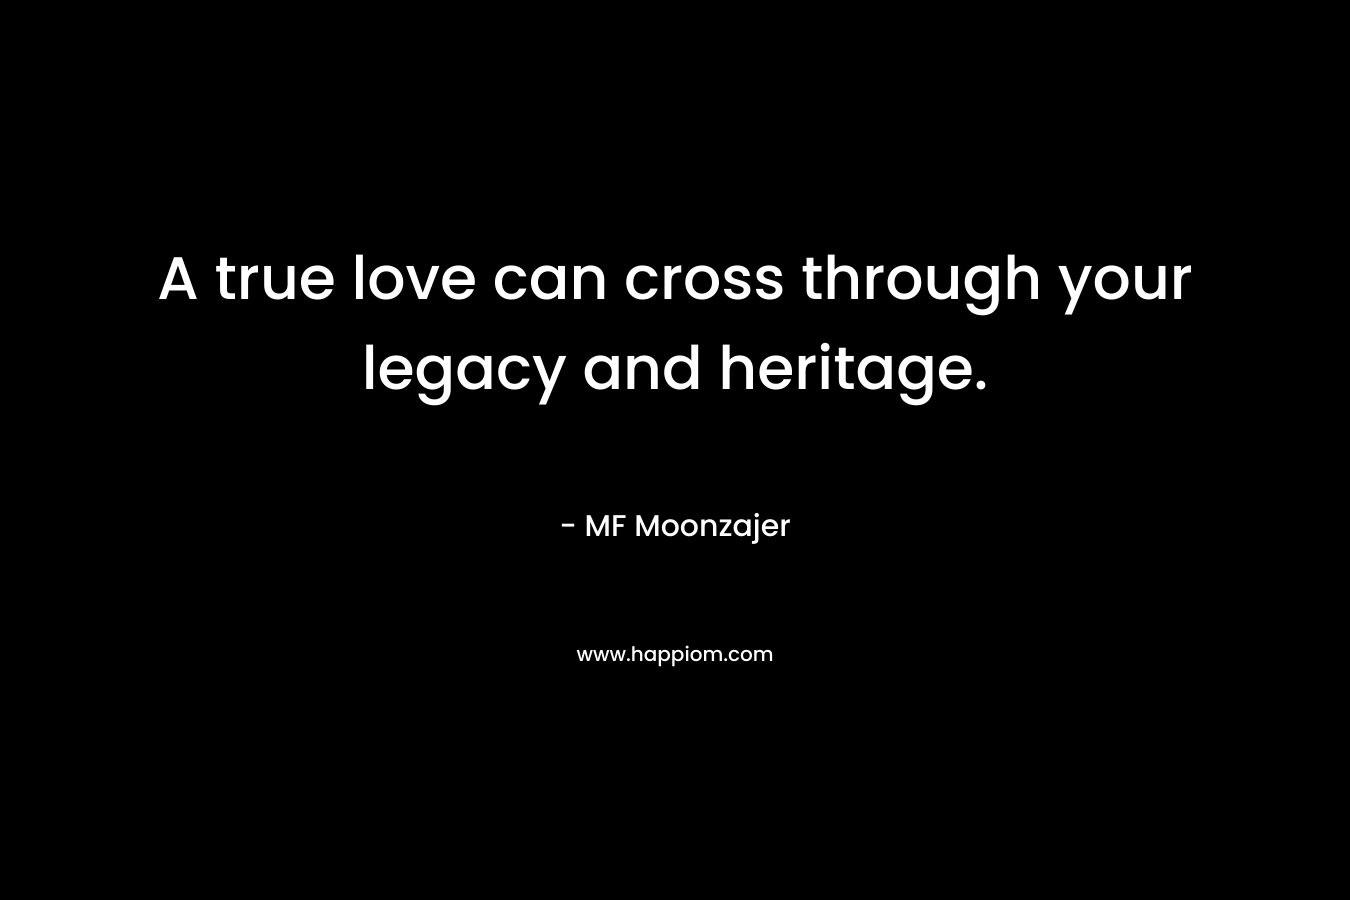 A true love can cross through your legacy and heritage. – MF Moonzajer